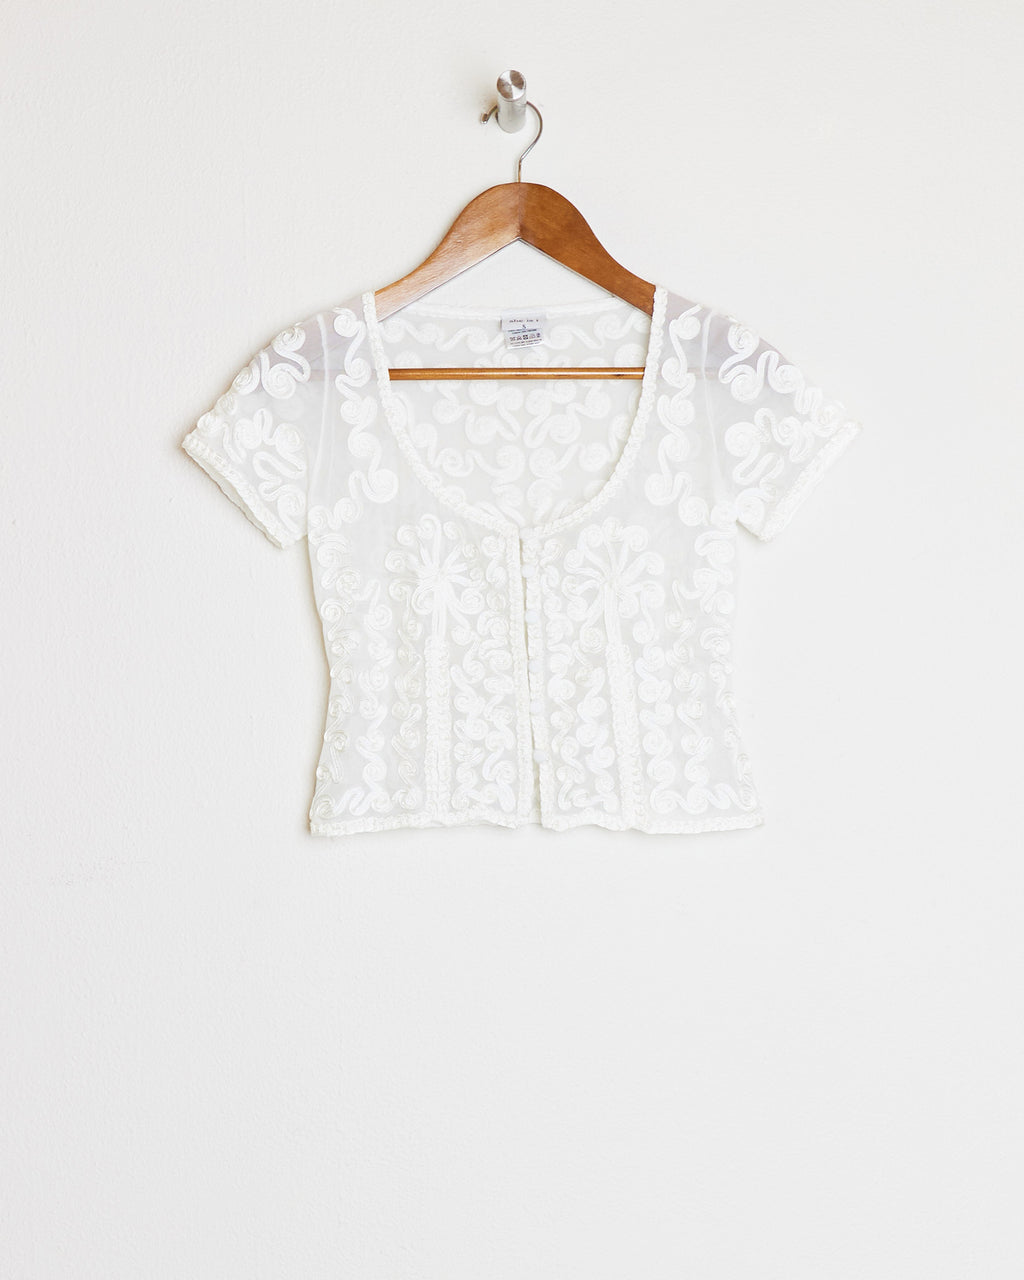 SHORT SLEEVE TOP IN WHITE